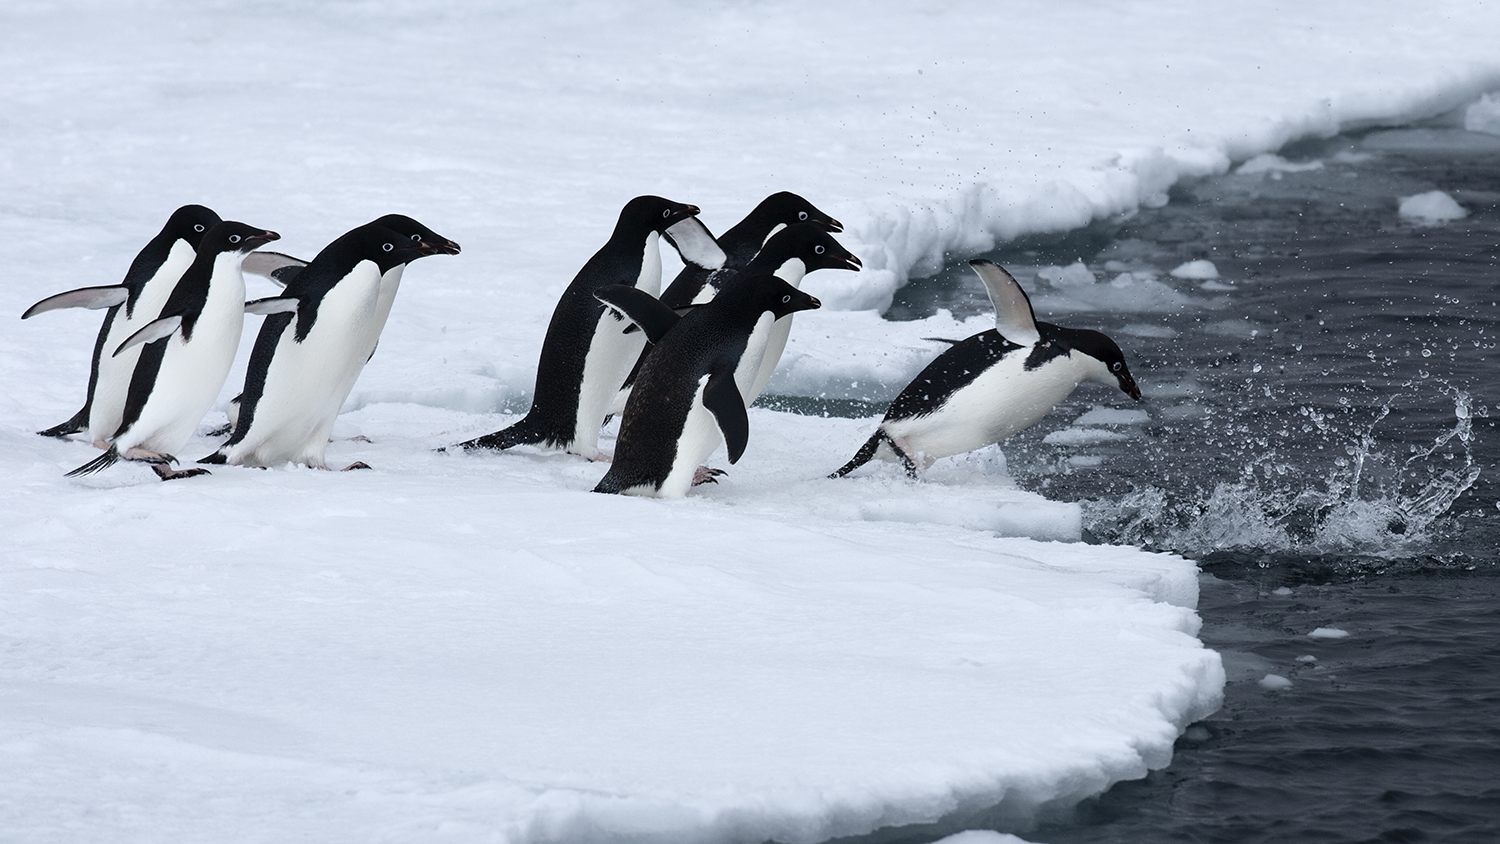 A group of penguins rushing along the ice toward the ocean. The first one is in mid-dive